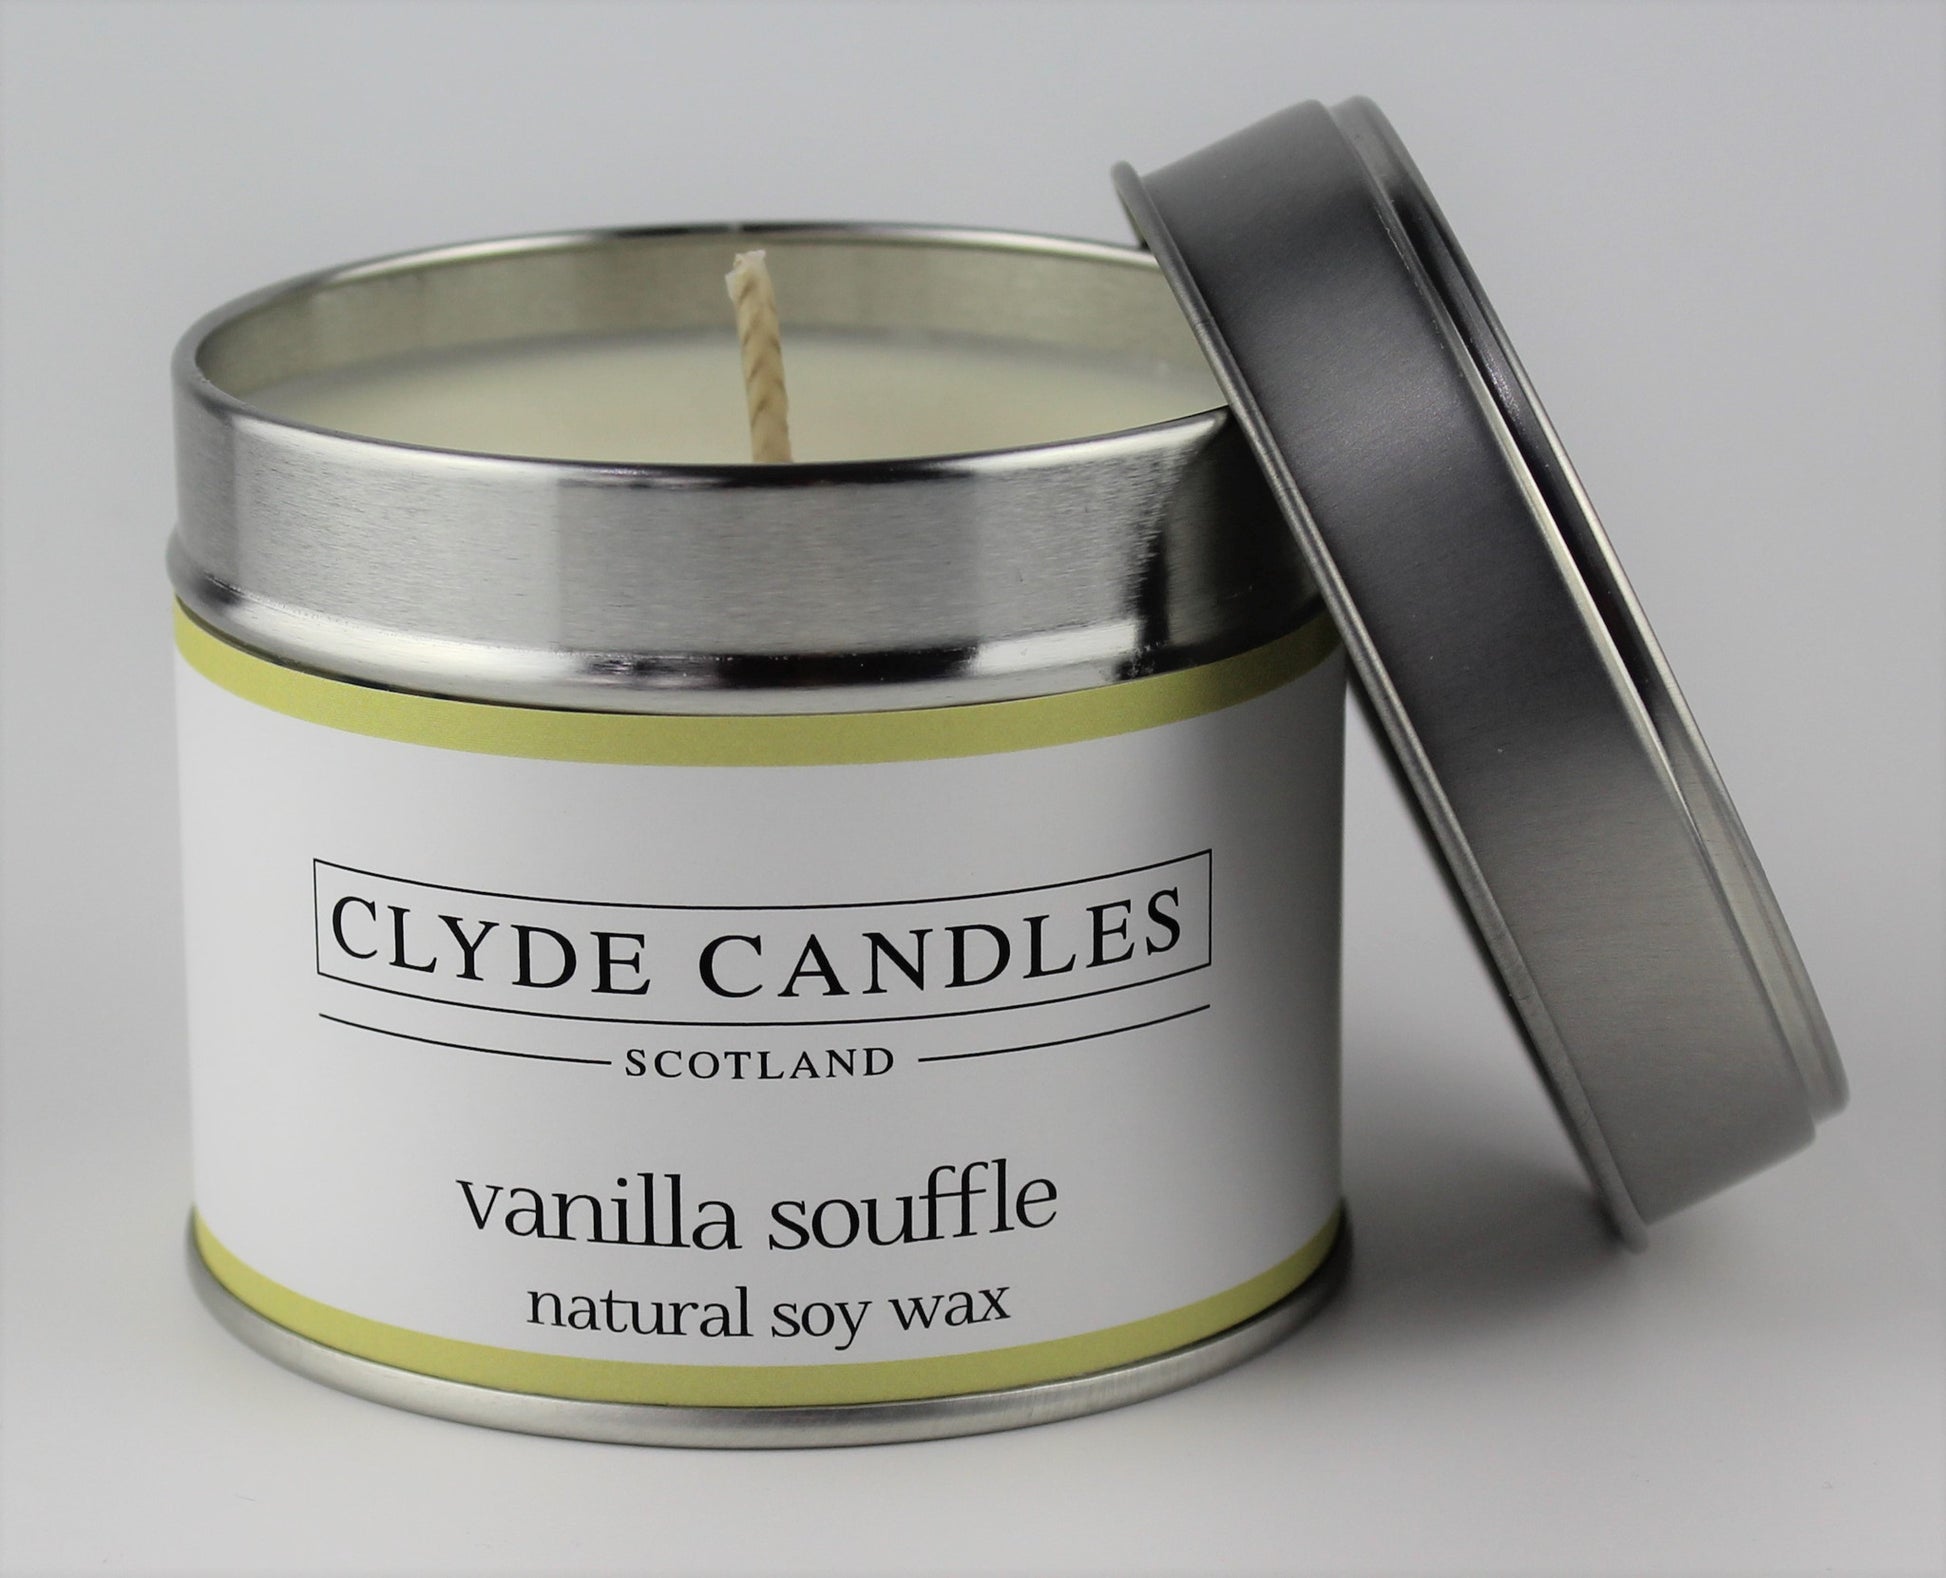 Vanilla Souffle Scented Candle Tin, Natural Soy wax, Scottish Candles, Clyde Candles